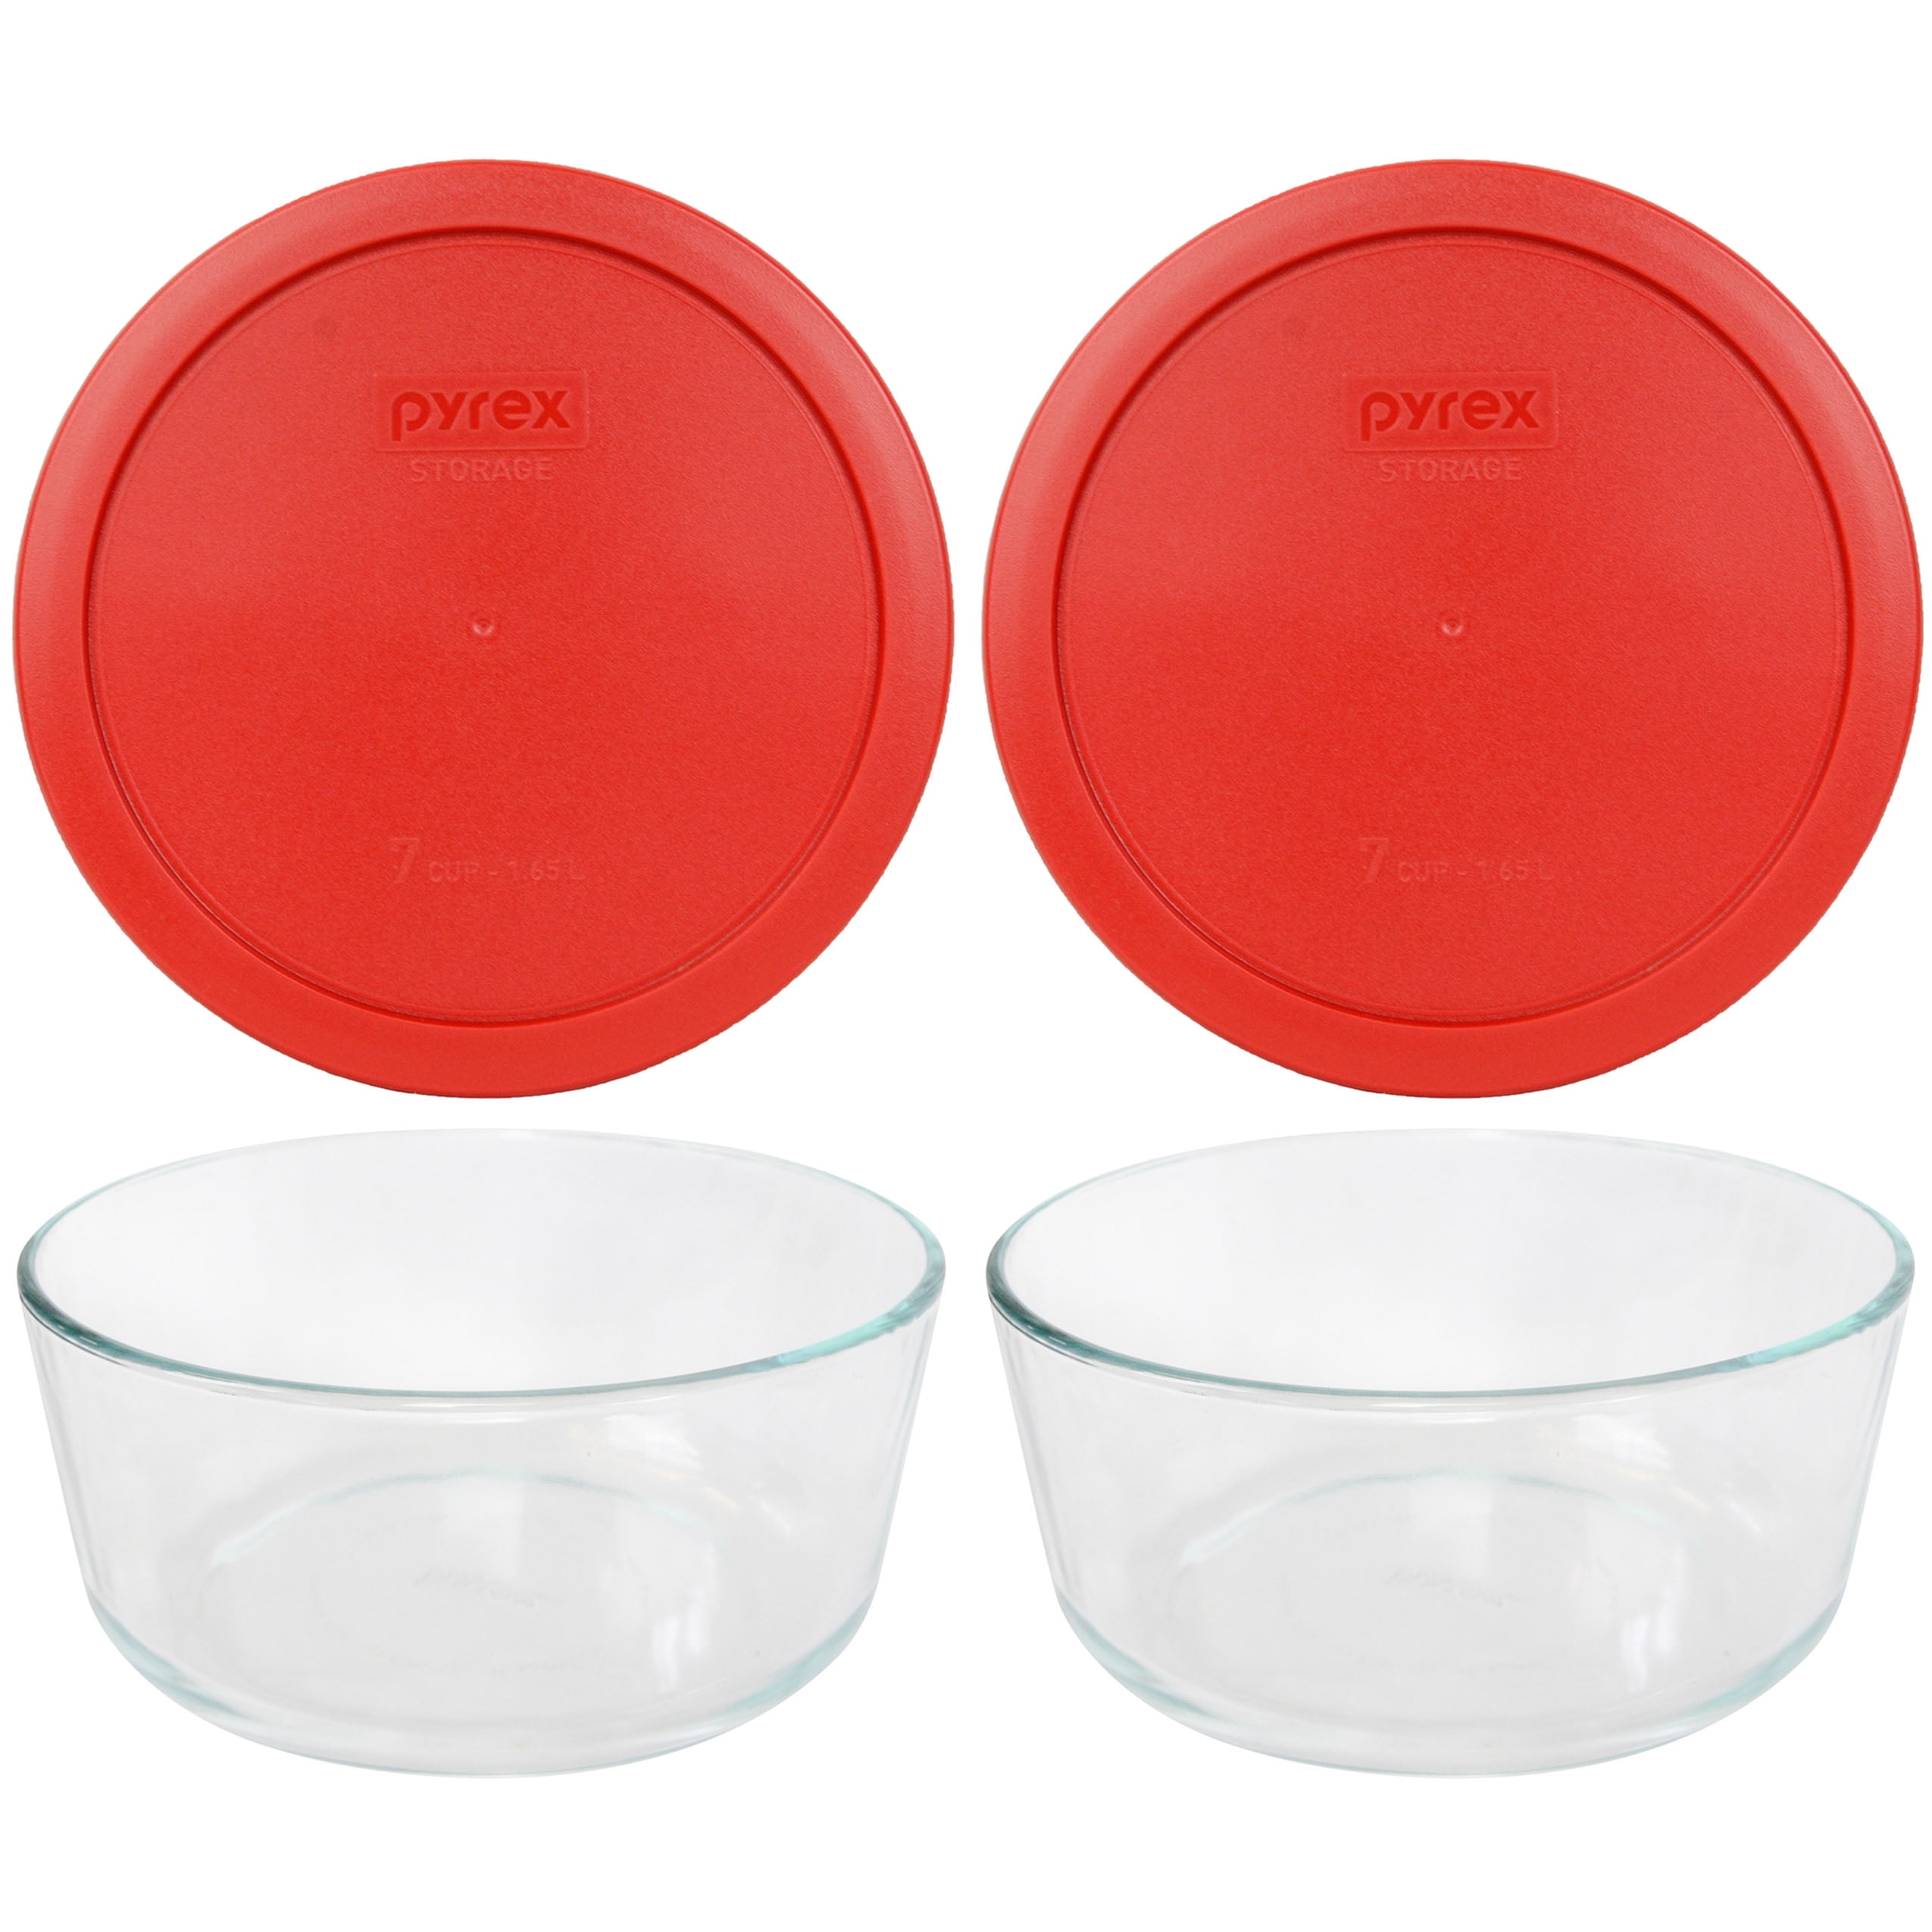 Pyrex 7203 7-Cup Round Glass Food Storage Bowls w/ 7402-PC 7-Cup Dark Blue & Red Lid Covers